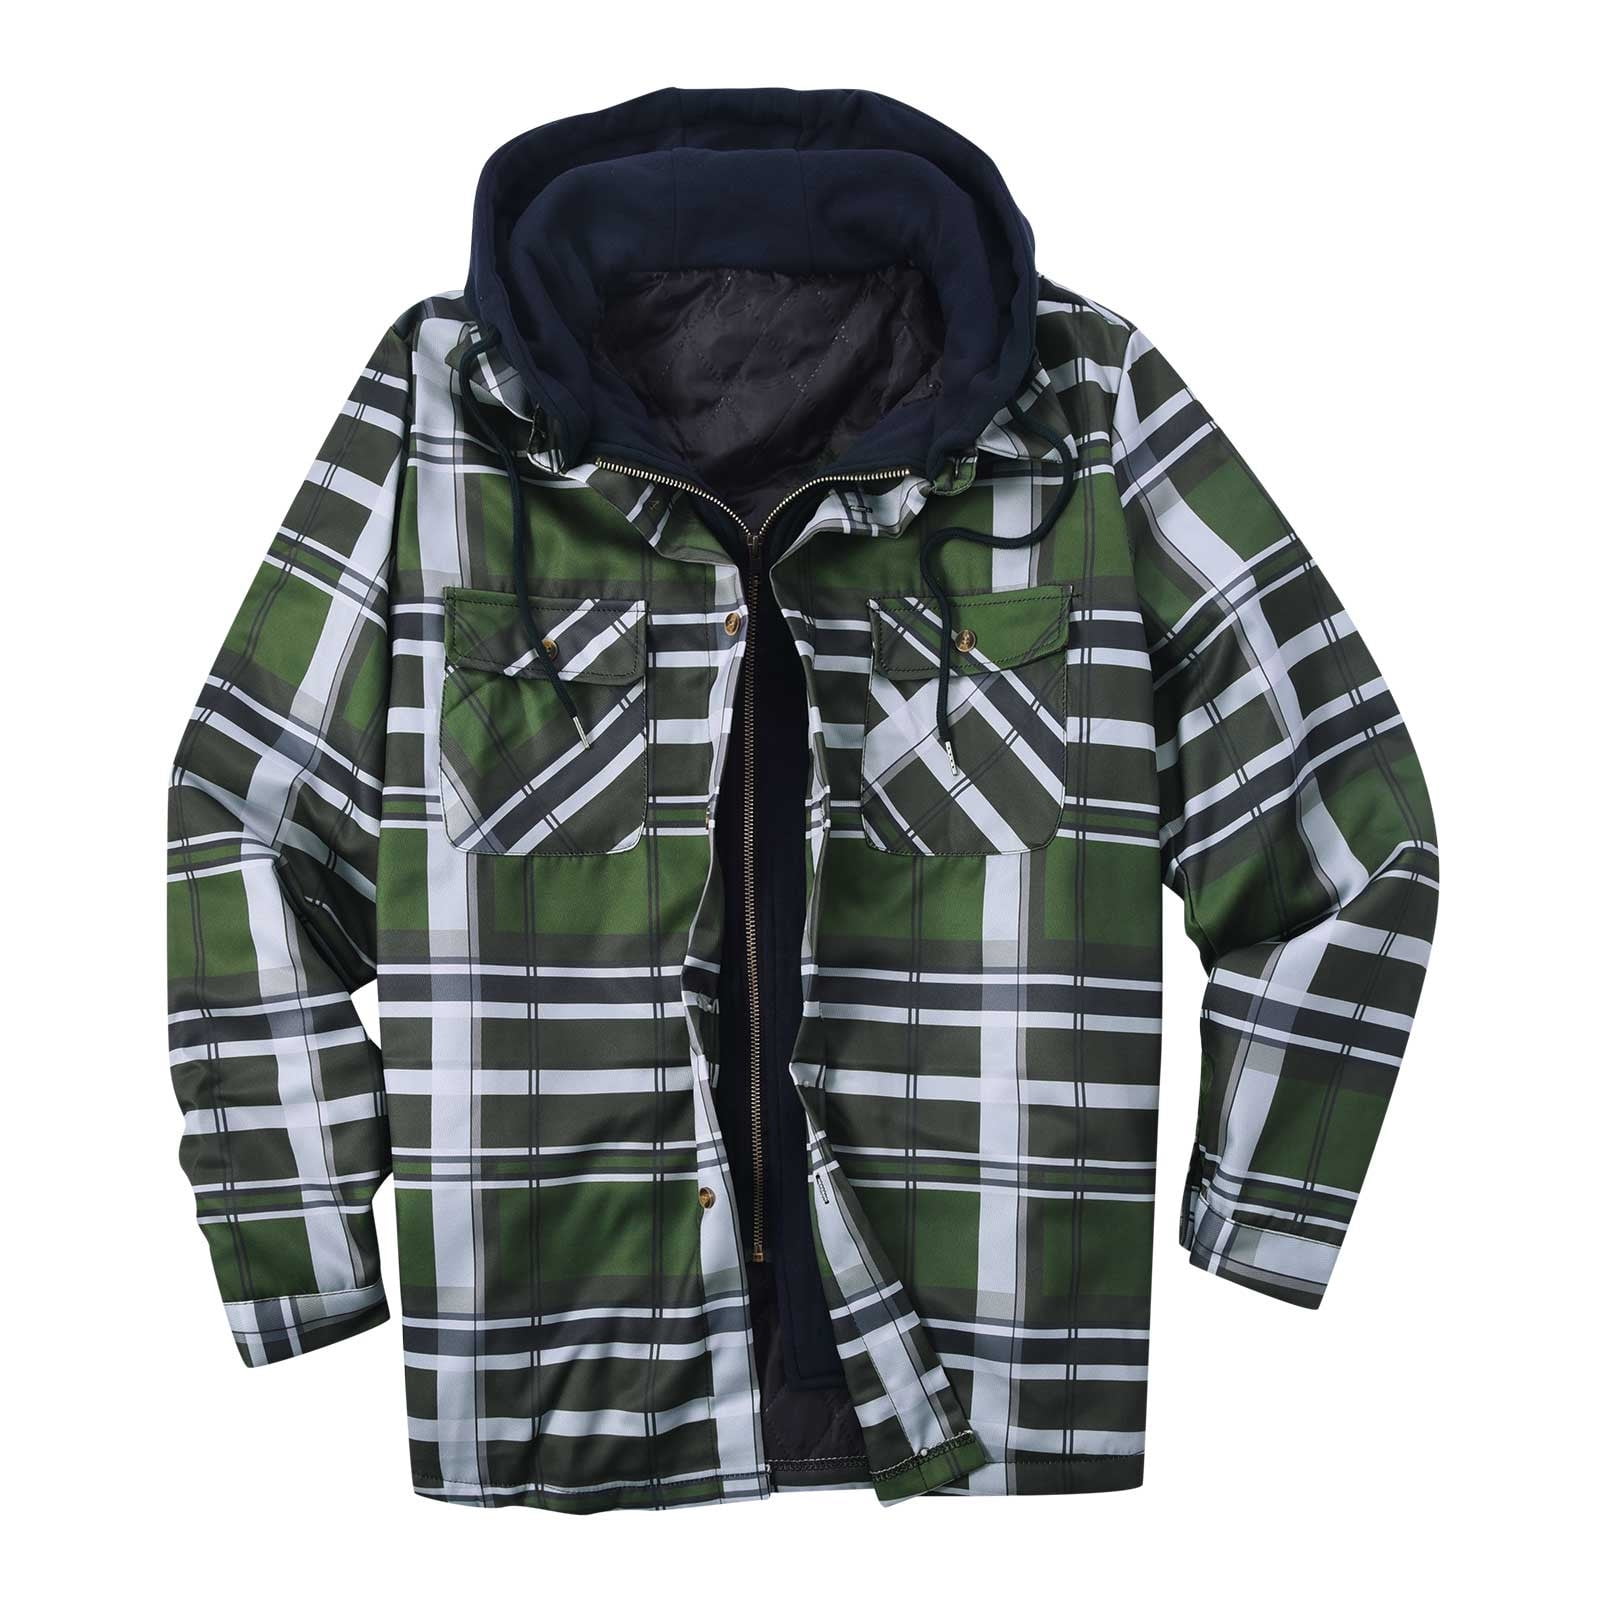 YYDGH Men's Flannel Plaid Shirt Jacket Winter Warm Long Sleeve Quilted  Lined Plaid Drawstring Coats Soft Button Down Thick Shirts with Hood Orange  3XL 